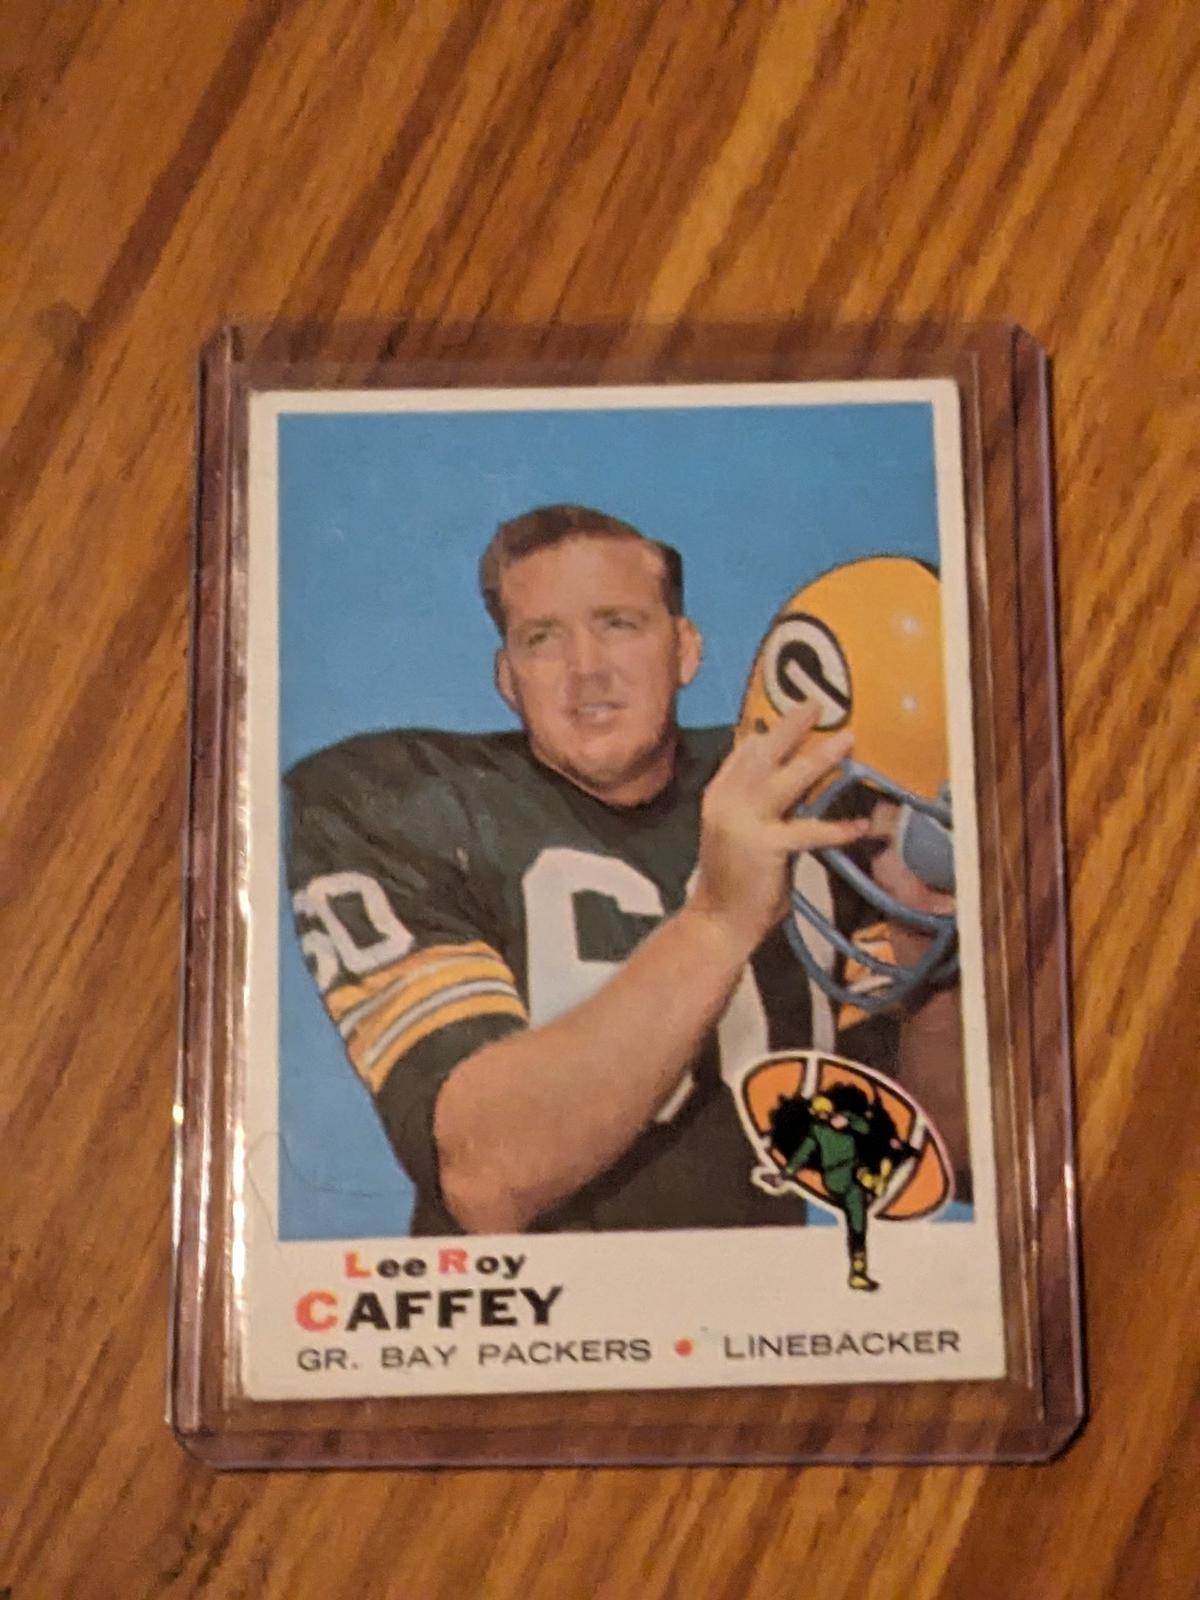 LEE ROY CAFFEY 1969 Vintage Topps Card #146 GREEN BAY PACKERS